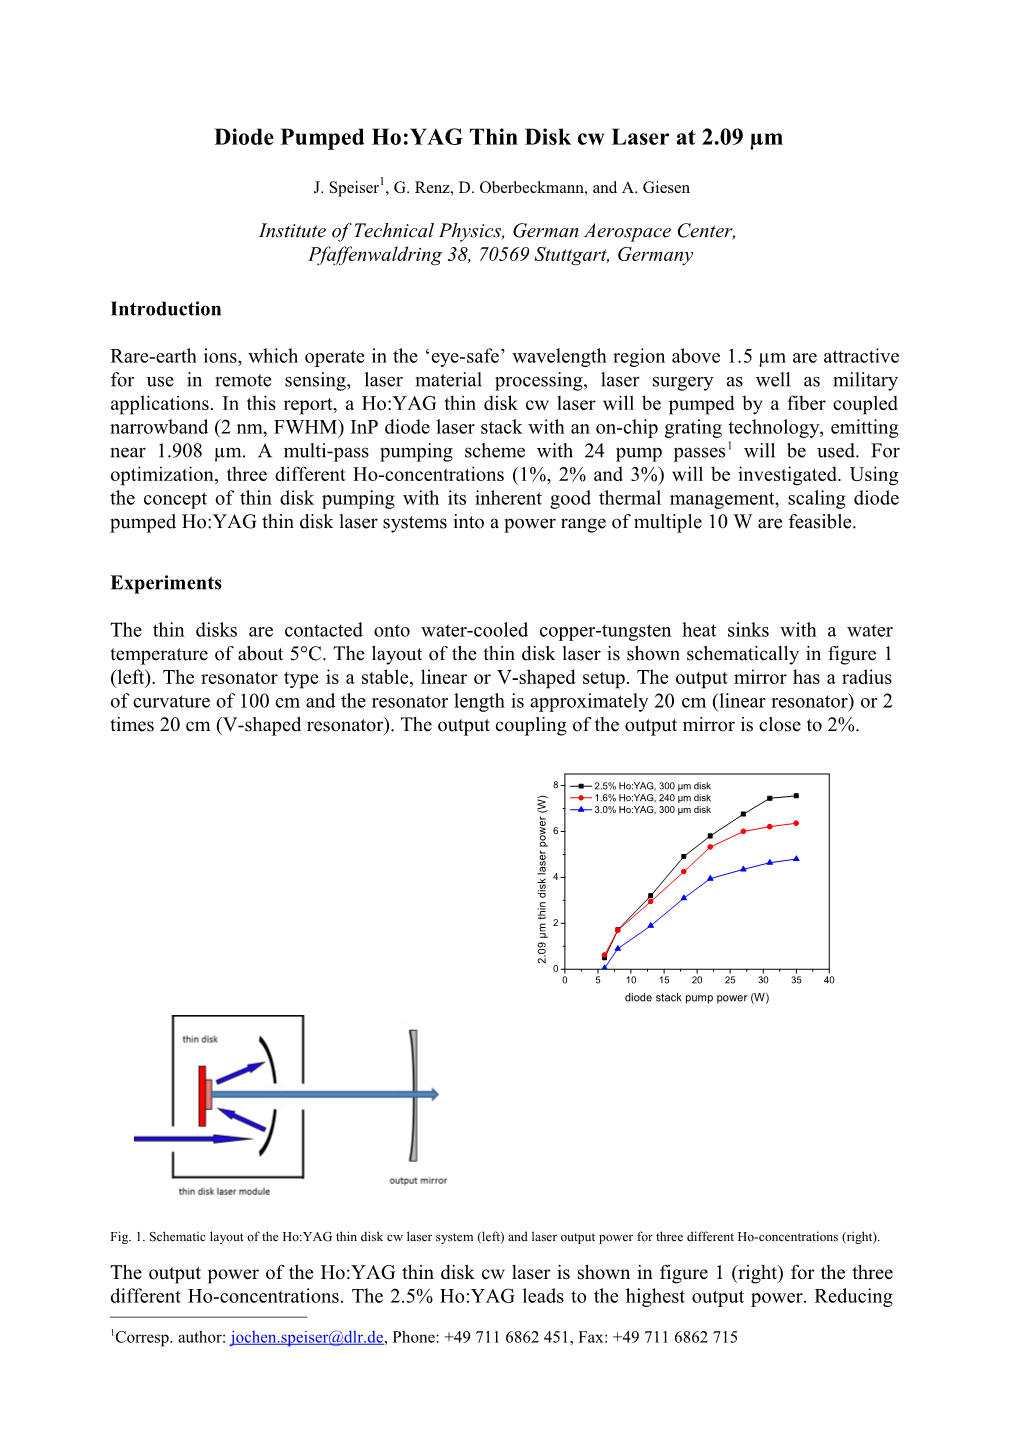 CW Polycrystalline Cr2+:Znse Amplifier and Theoretical Considerations